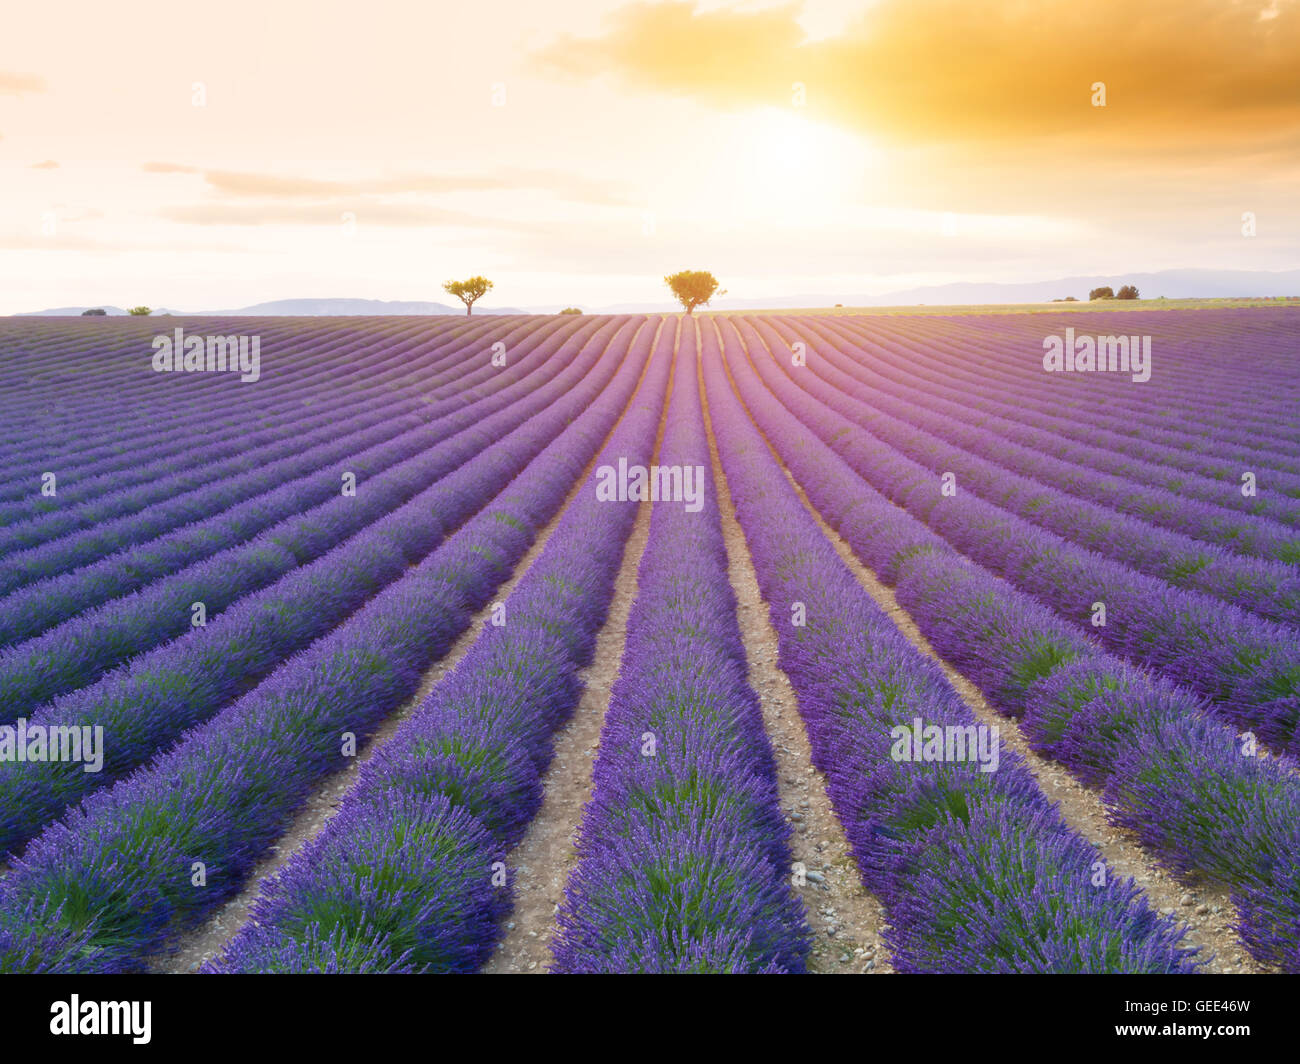 Beautiful landscape of blooming lavender field in sunset, lonely tree uphill on horizon. Provence, France, Europe. Stock Photo